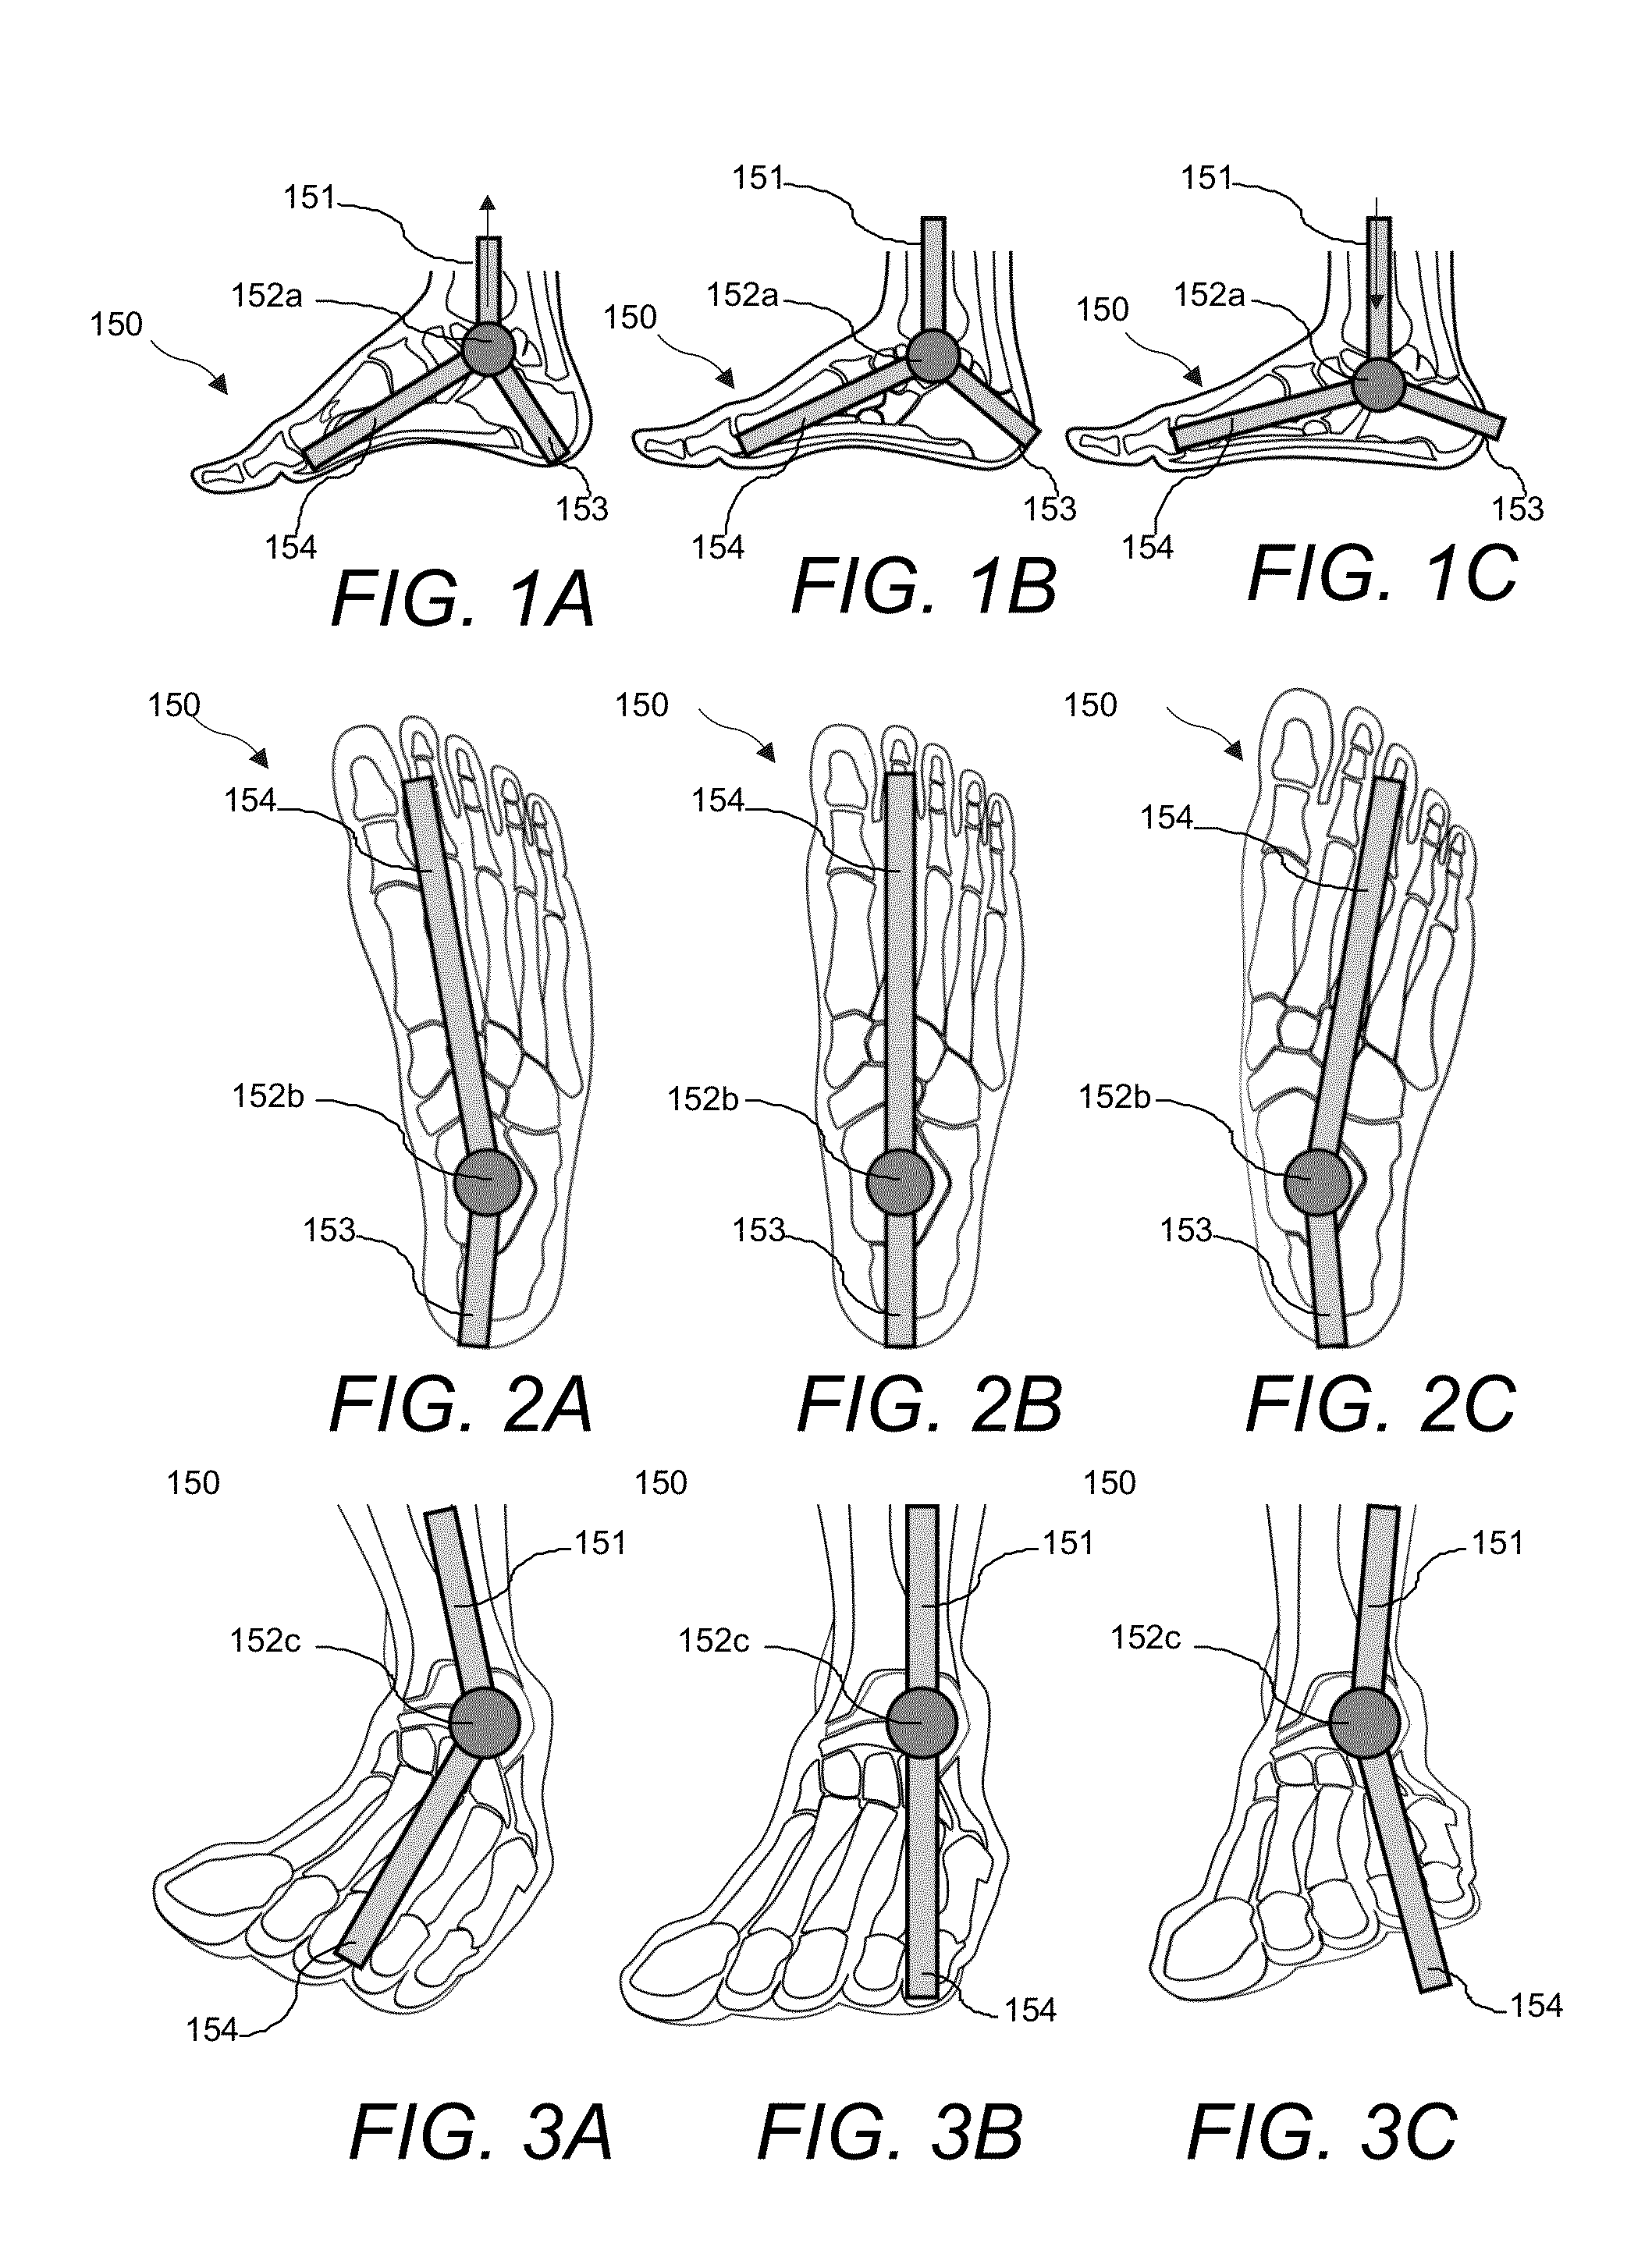 Article of Footwear with Embedded Orthotic Devices